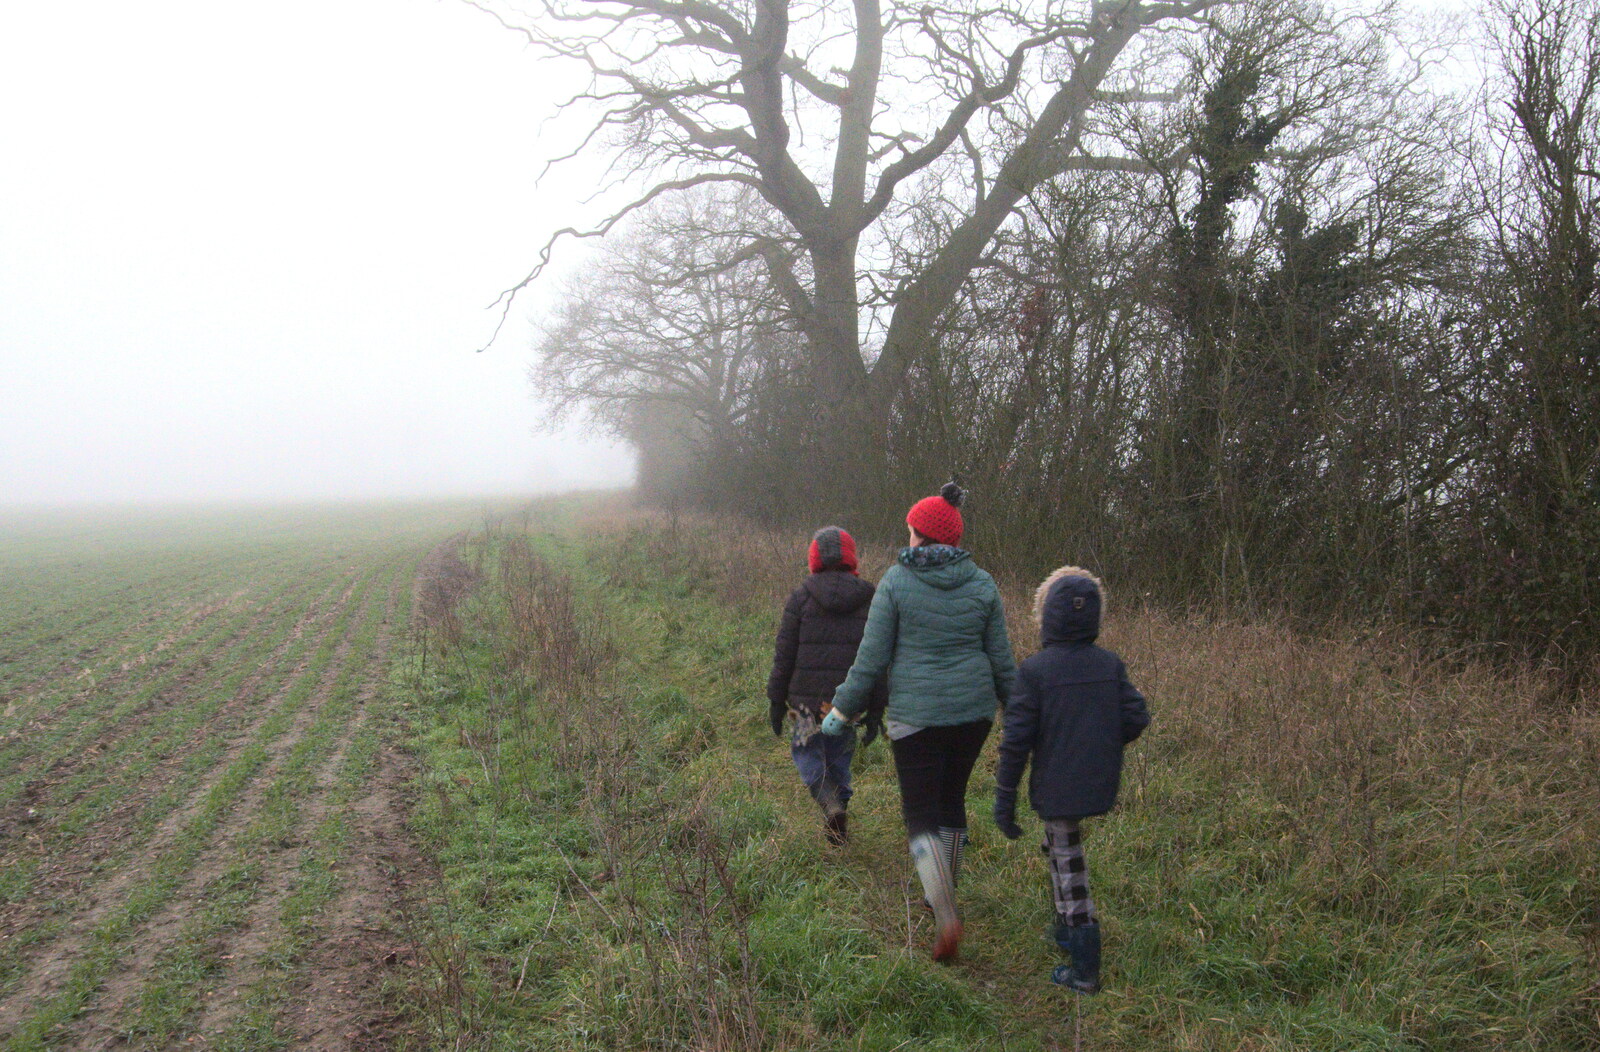 We walk around a field in the gathering gloom from Fun With Ice in Lockdown, Brome, Suffolk - 10th January 2021